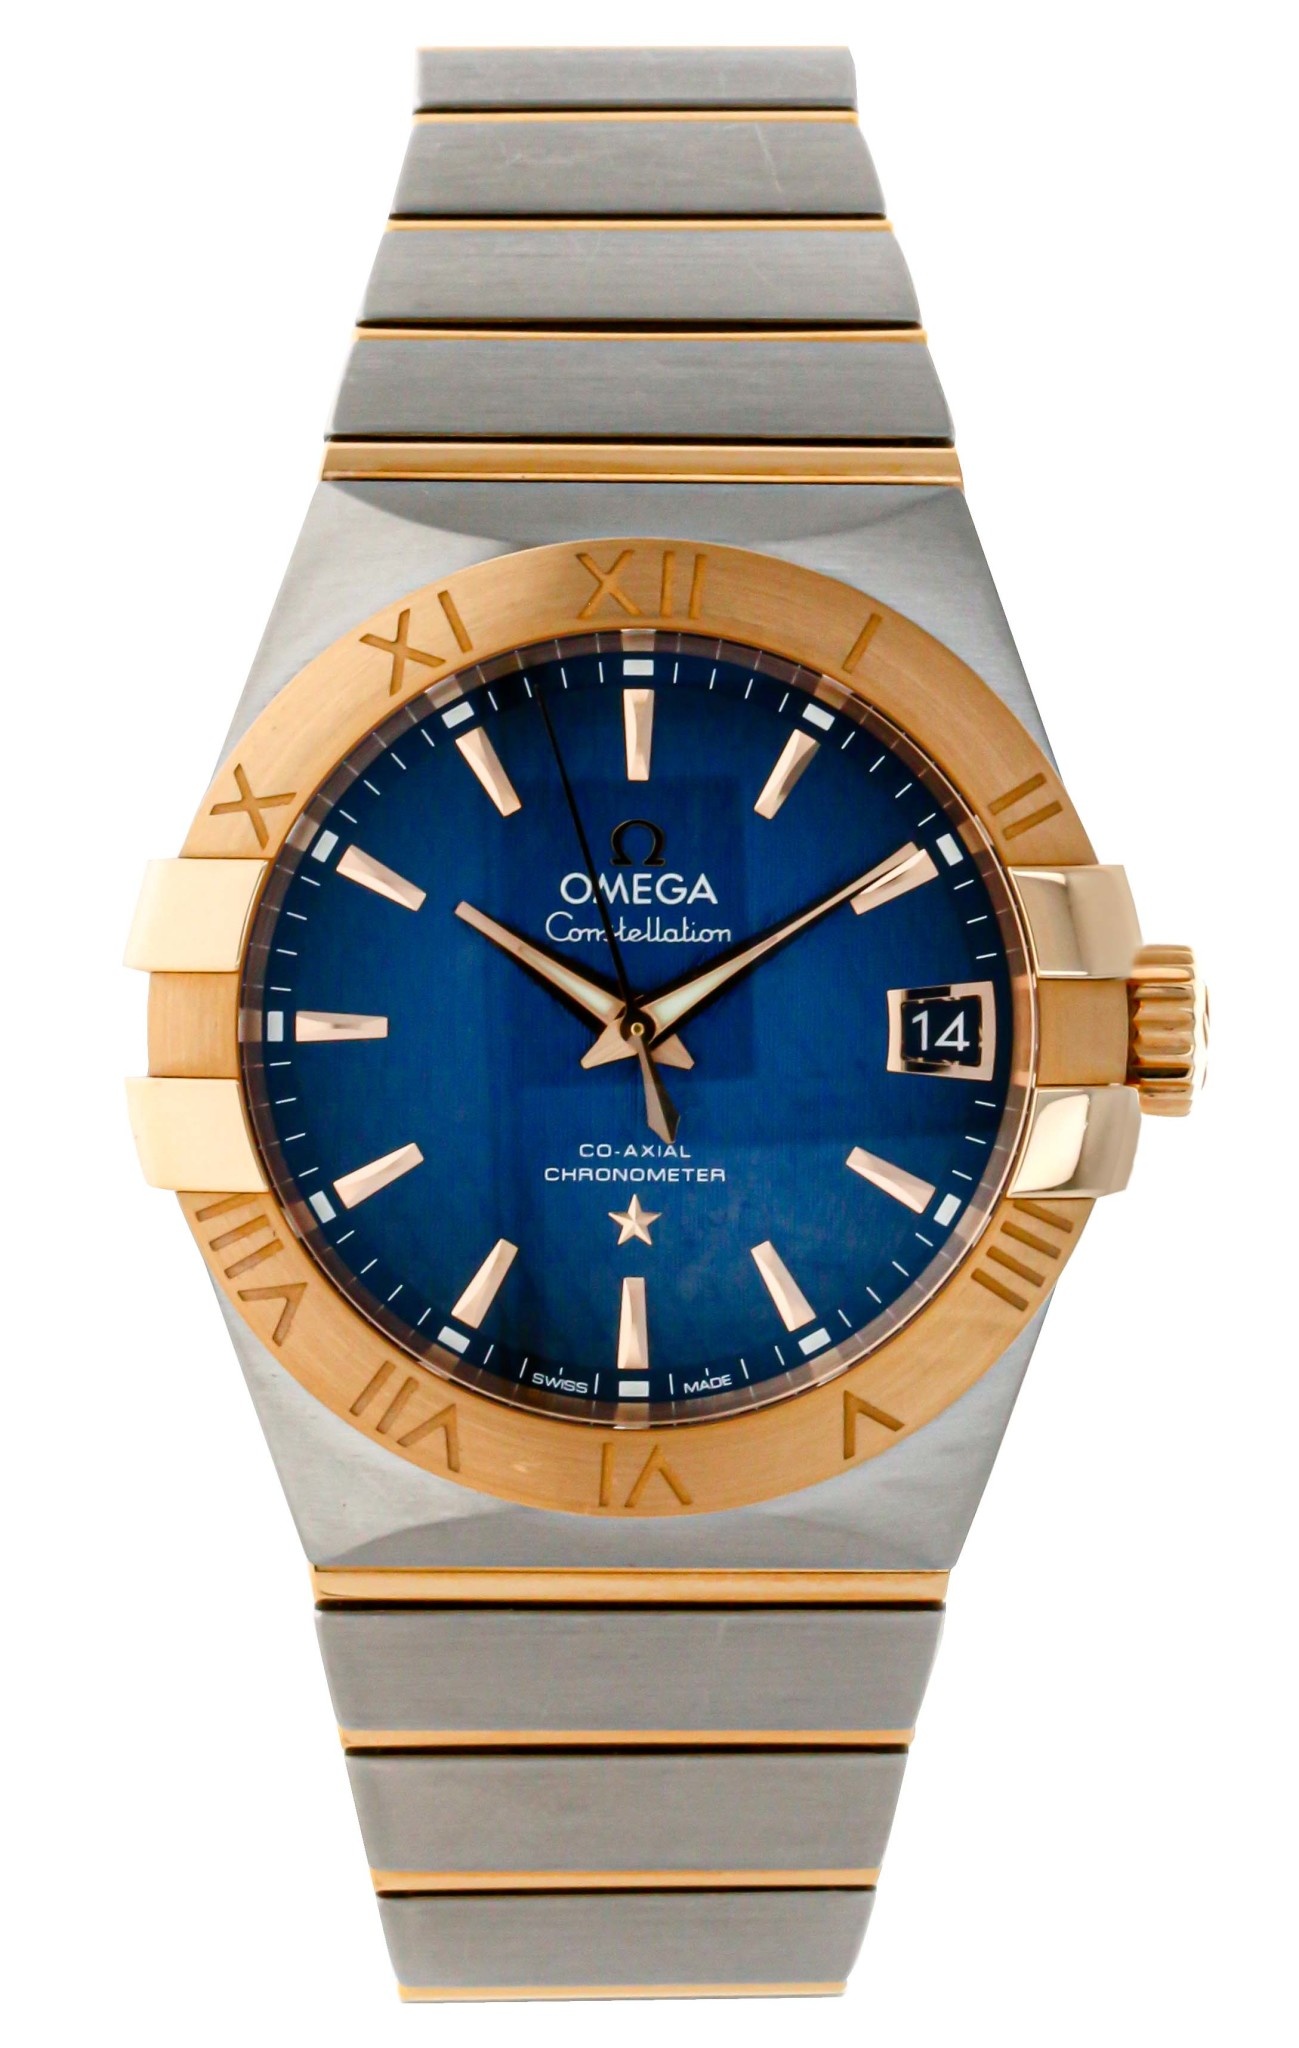 6 Best Omega Watches for Women 